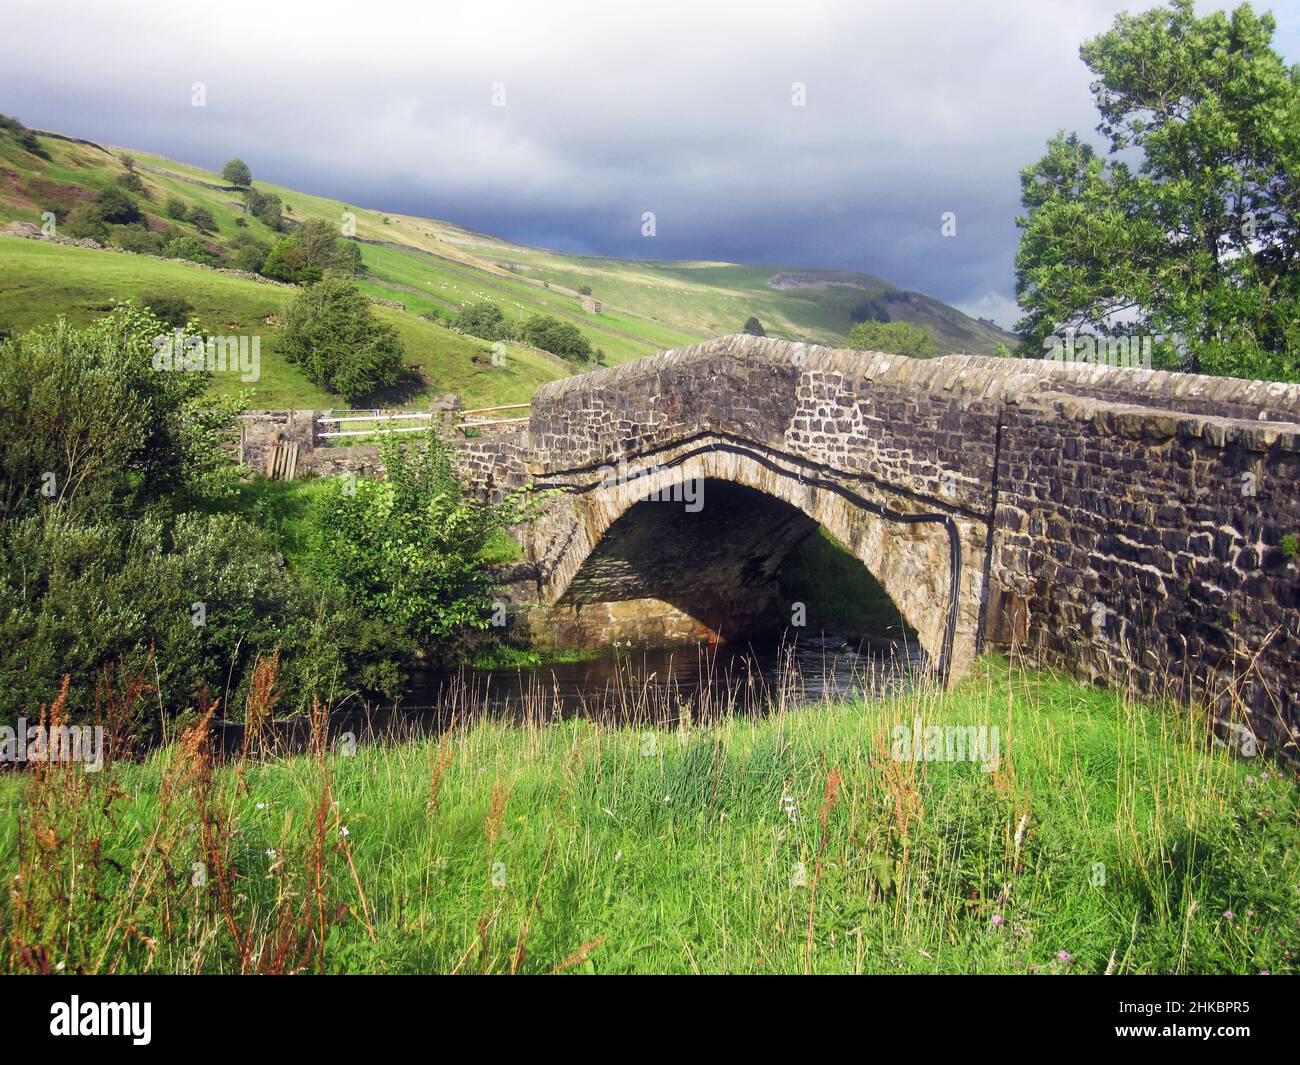 Il ponte a Muker, Swaledale, North Yorkshire Moors Foto Stock